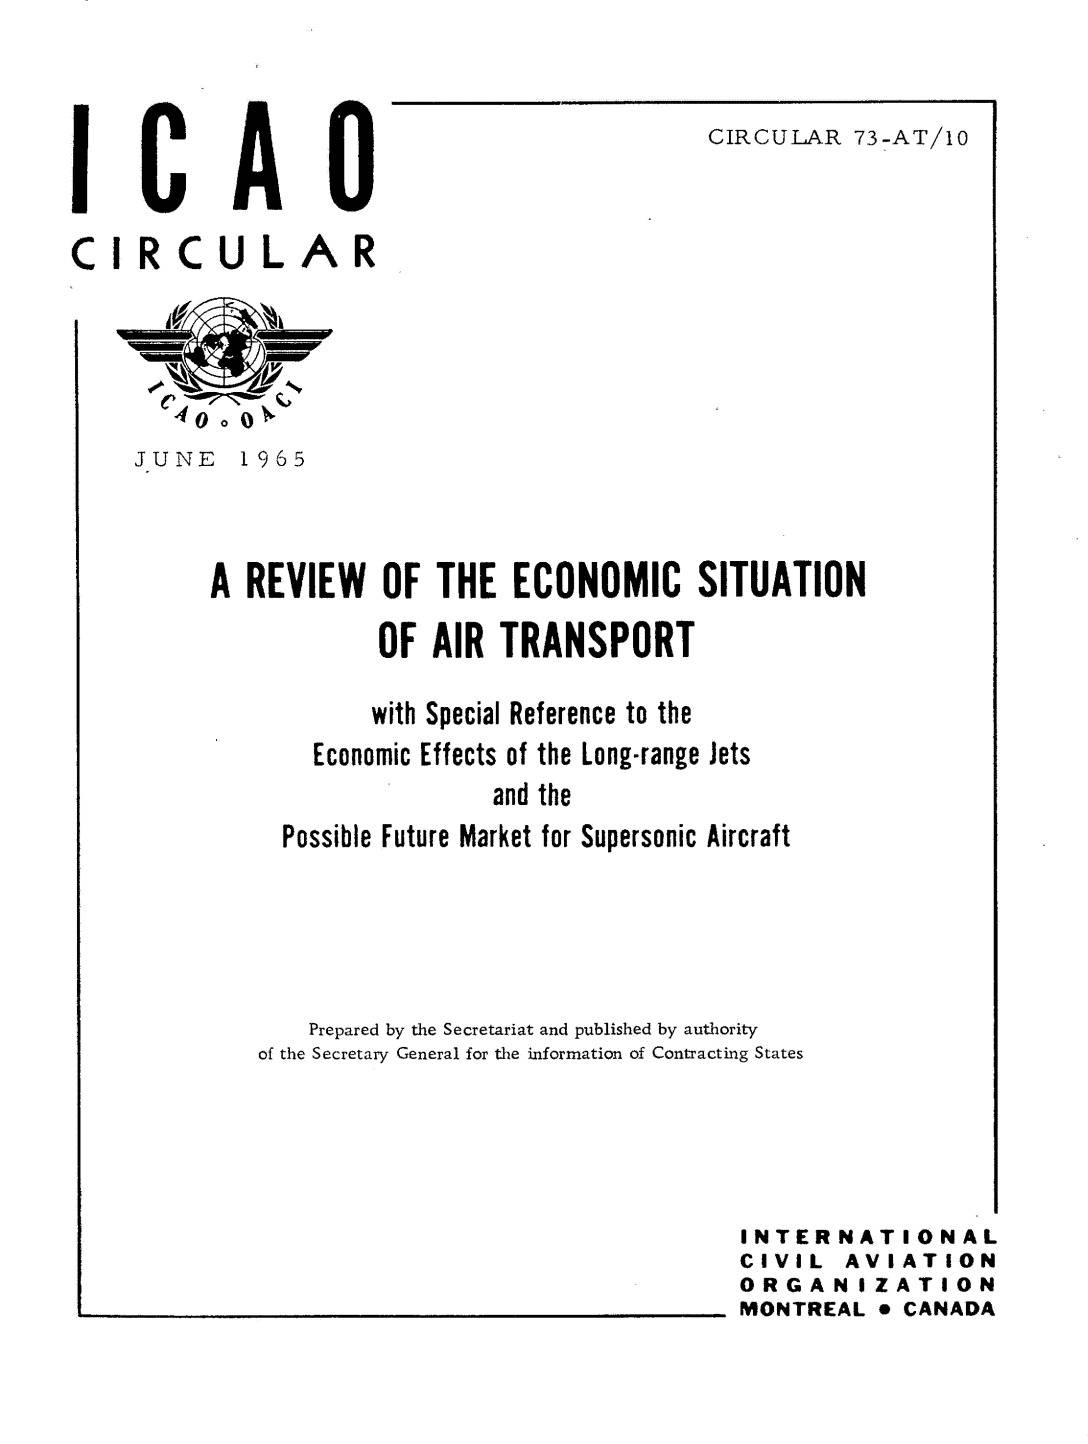 Cir 73 A REVIEW OF THE ECONOMIC SITUATION  OF AIR TRANSPORT  with Special Reference to the  Economic Effects of the Long-range Jets  and the  Possible Future Market for Supersonic Aircraft